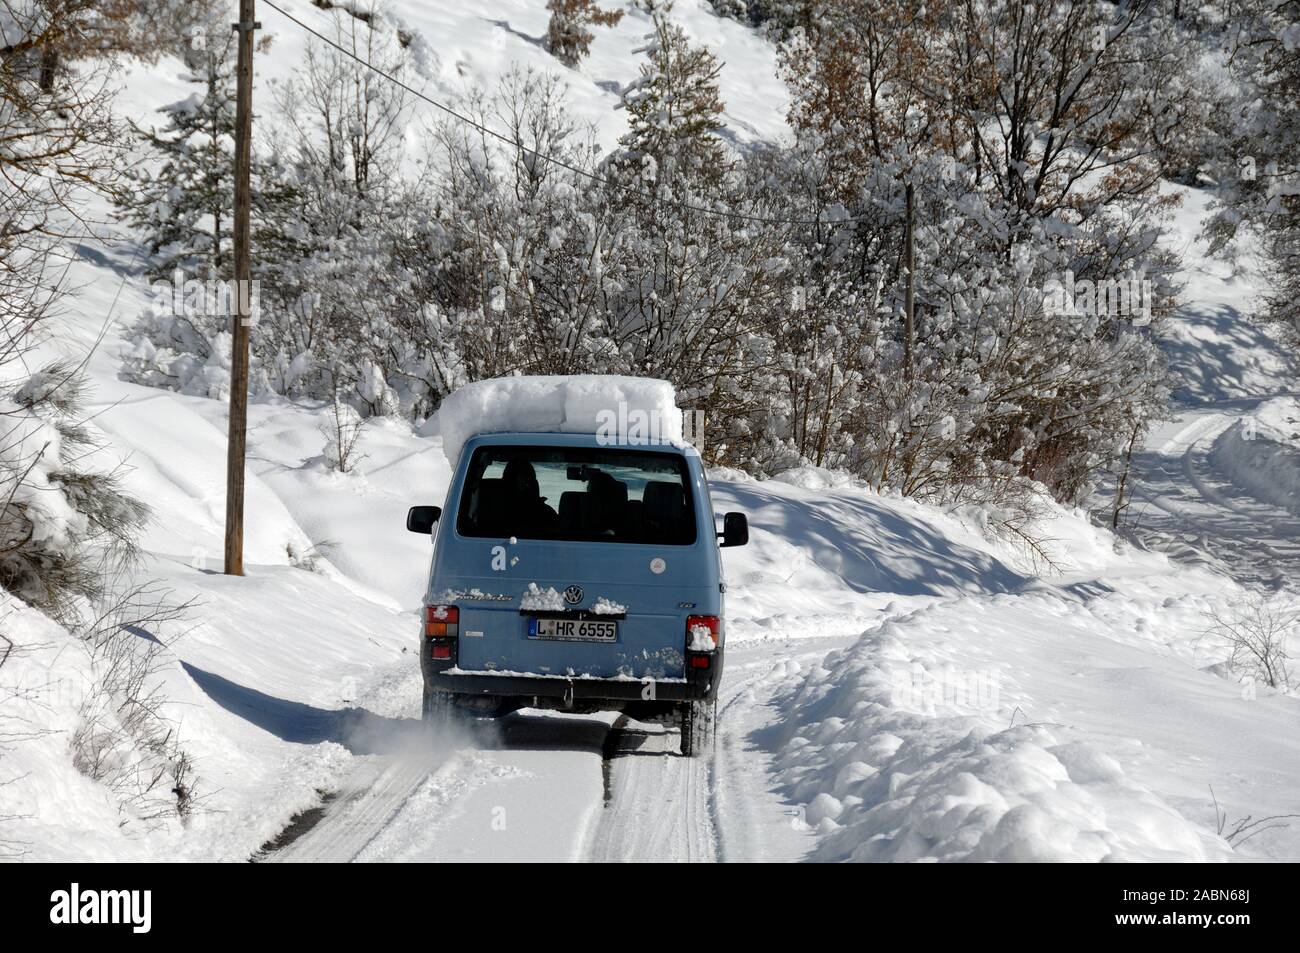 Car Driving on Packed Snow or Snowy Country Road Blieux Alpes-de-Haute-Provence Provence France Stock Photo